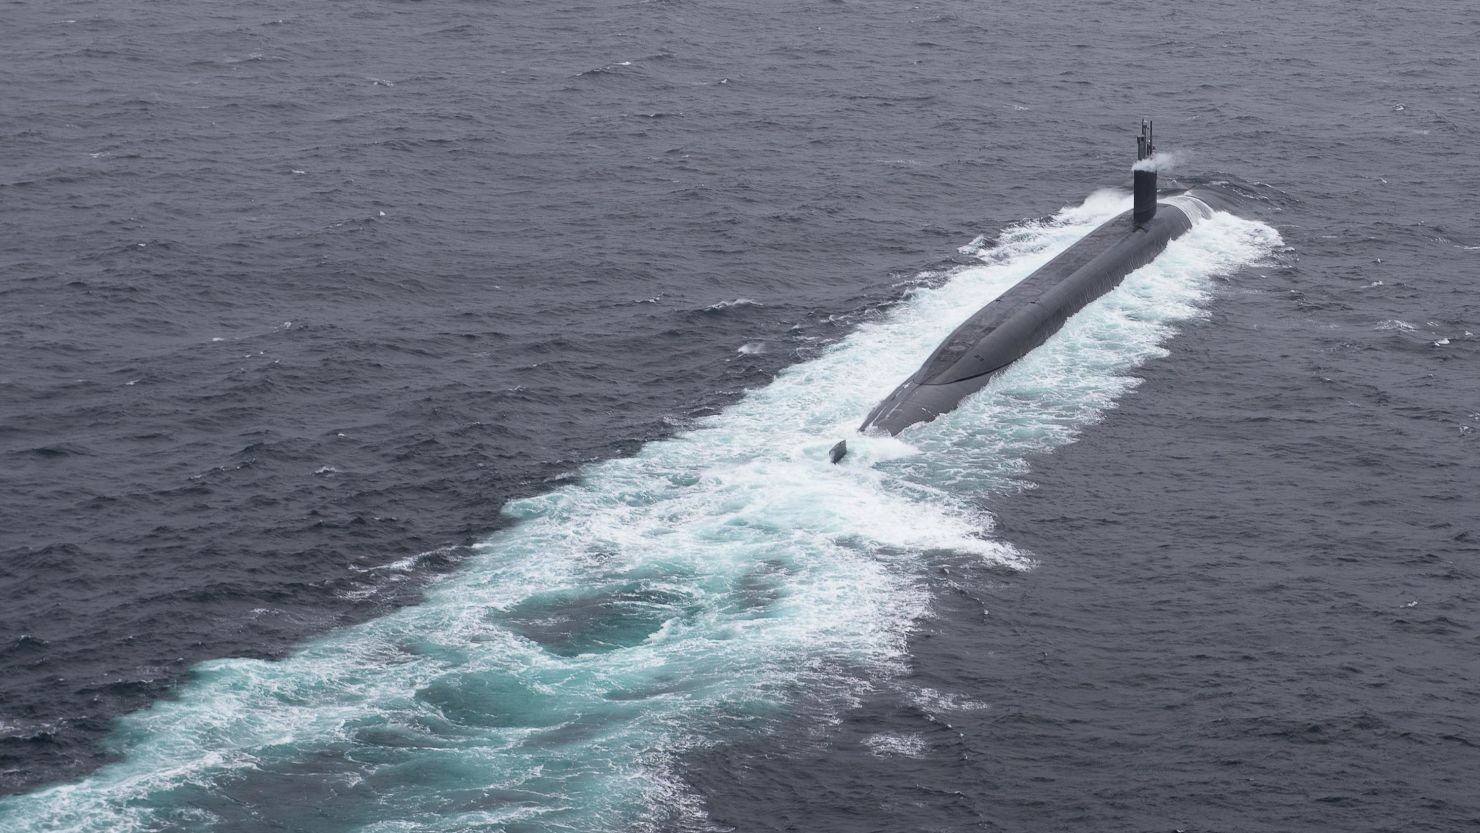 Nuclear capable US submarine makes first port call in South Korea